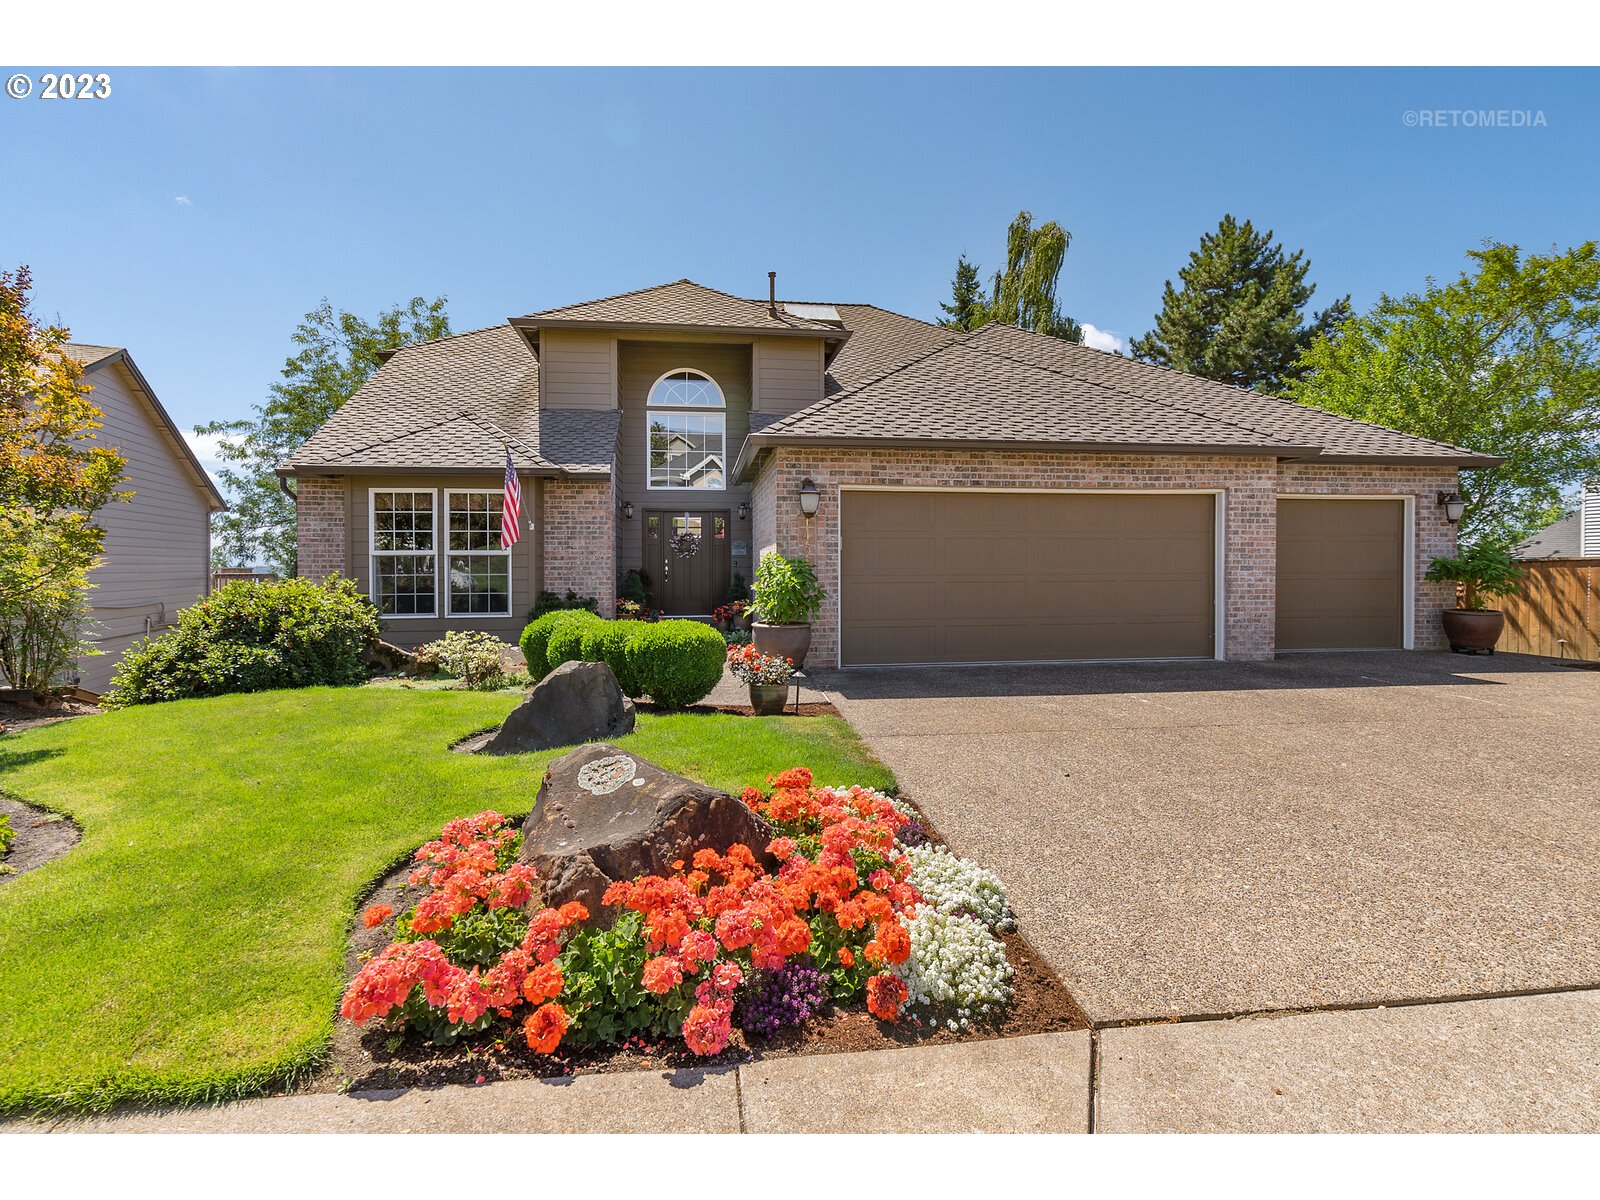 View main image for listing located at: 14376 SW Aynsley Way